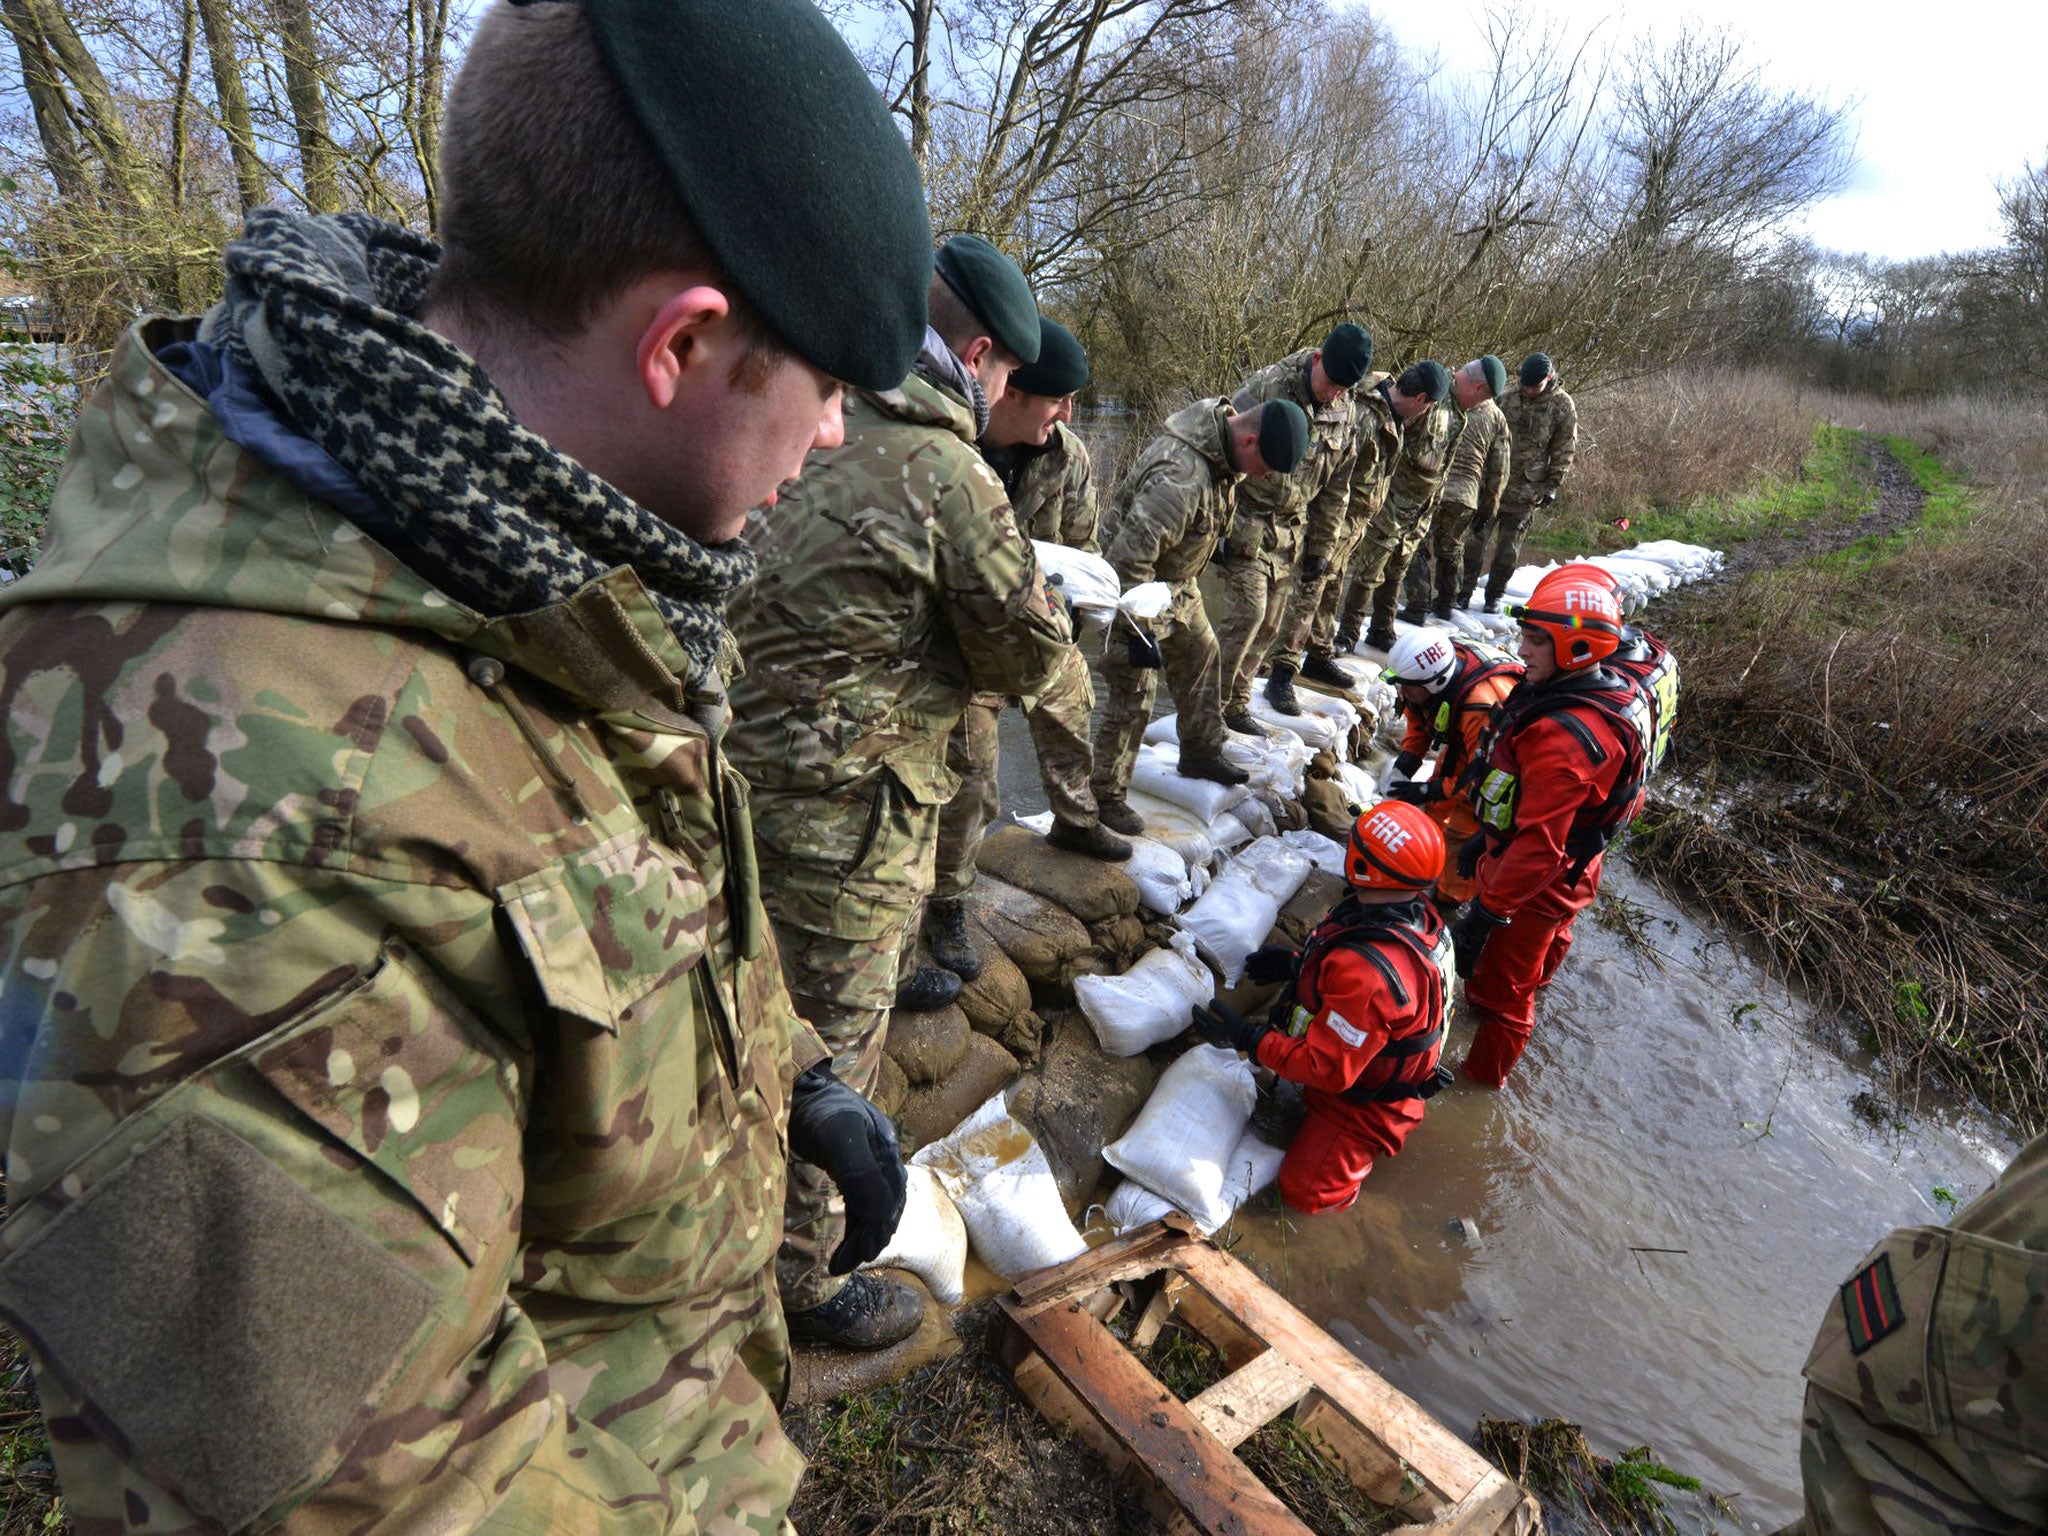 Reserve soldiers of 7 Battalion The Rifles, deployed alongside members of Berkshire Fire and Rescue Service, working hard to dam a breach in the Kennet Canal that threatened an electrical sub-station near Burghfield, south of Reading, as the military were